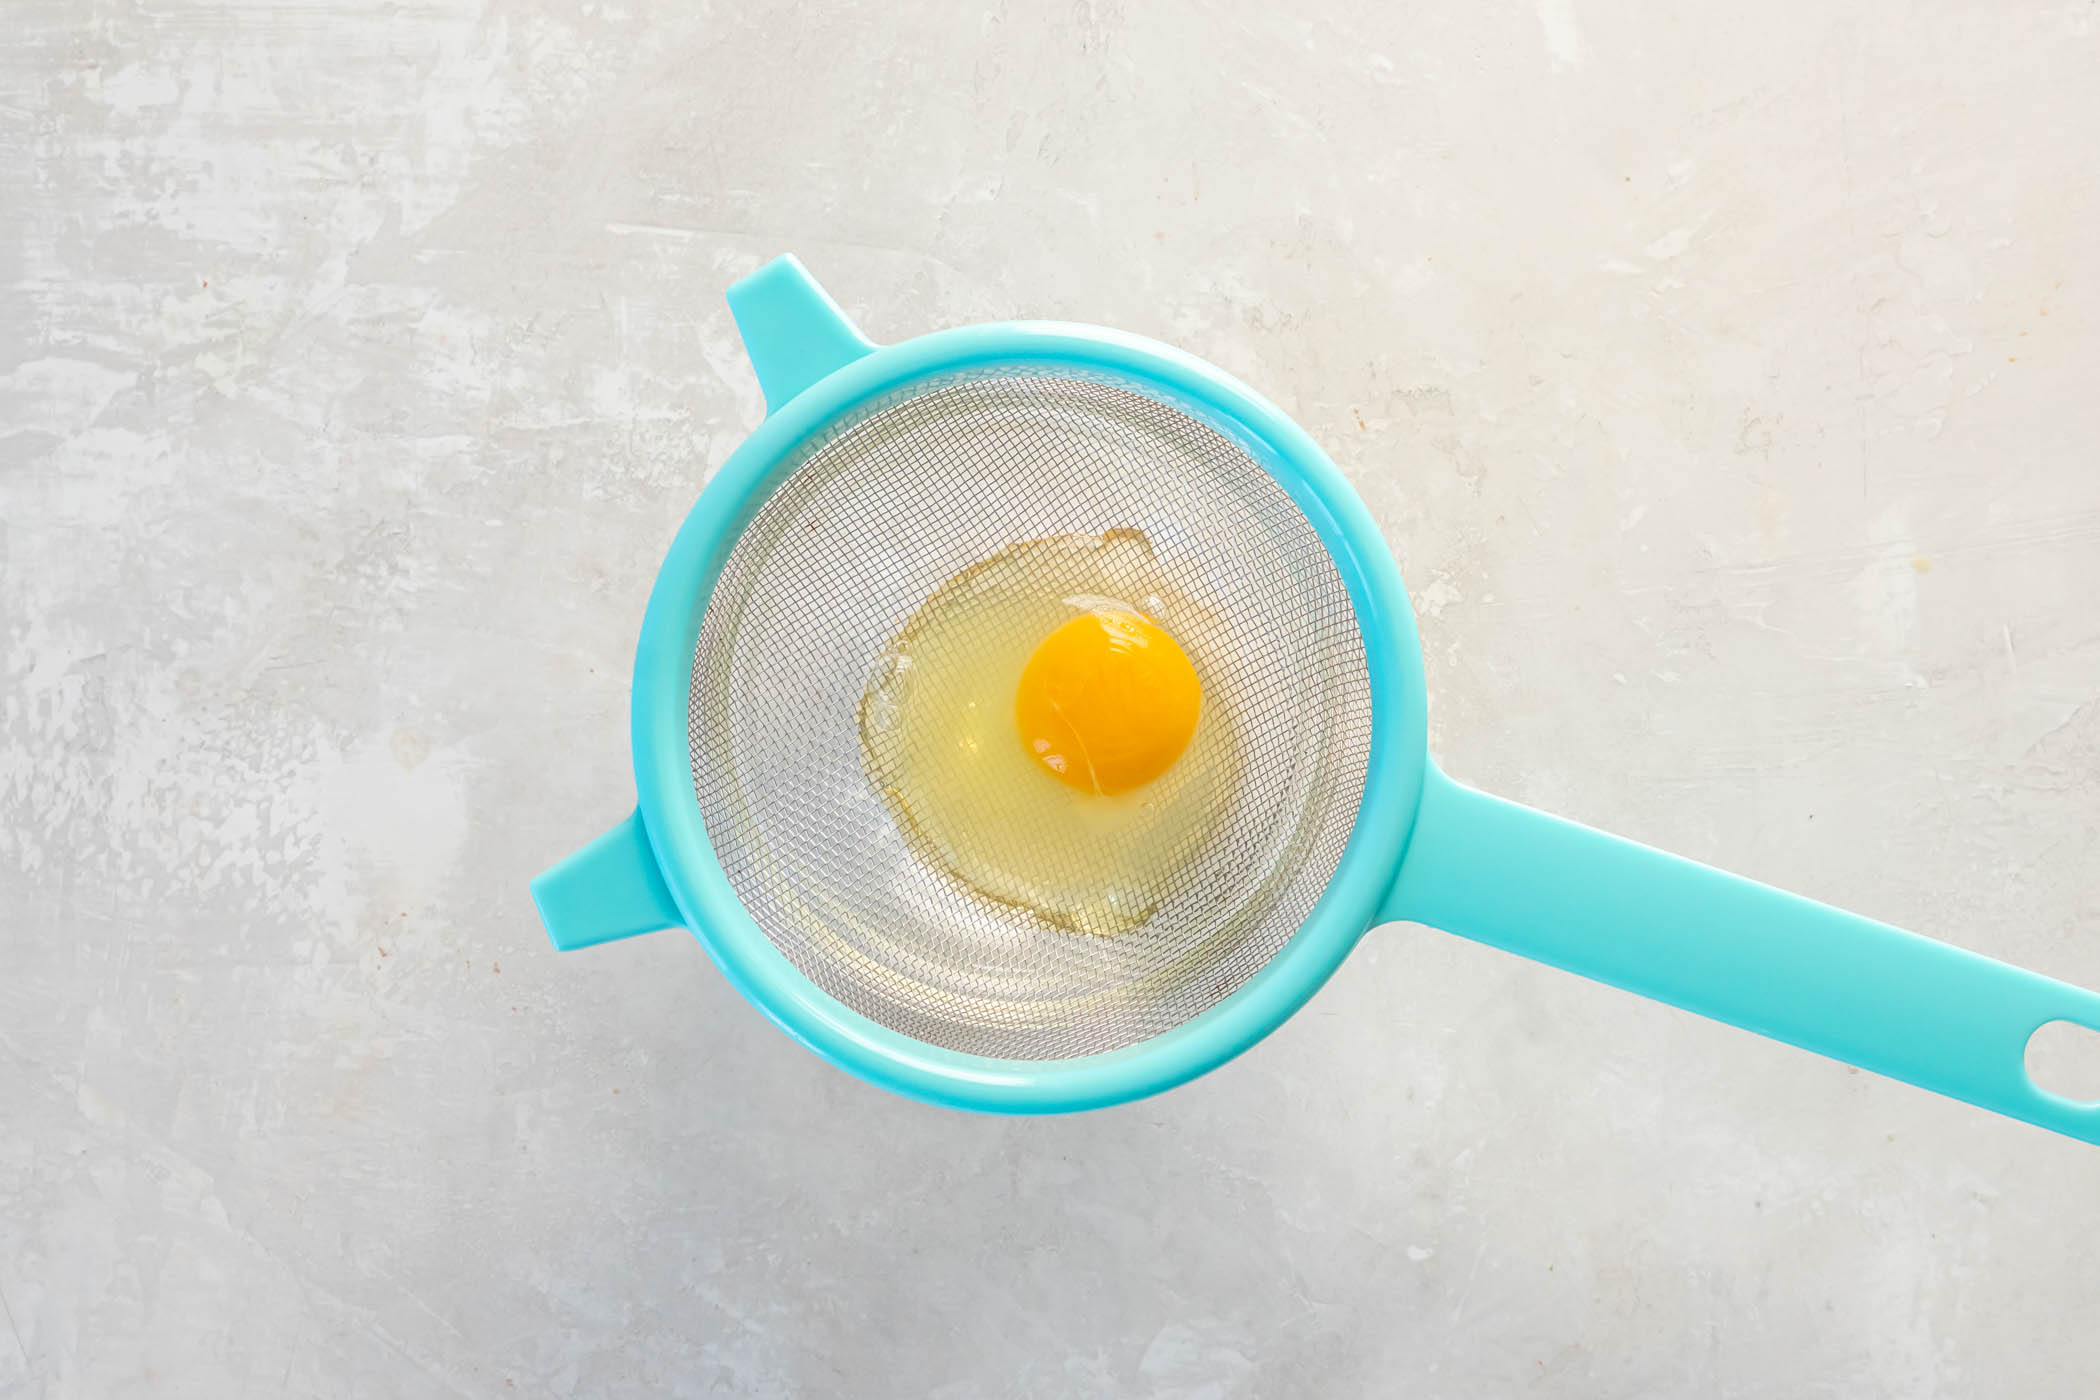 Egg cracked into a mesh strainer set over a bowl.